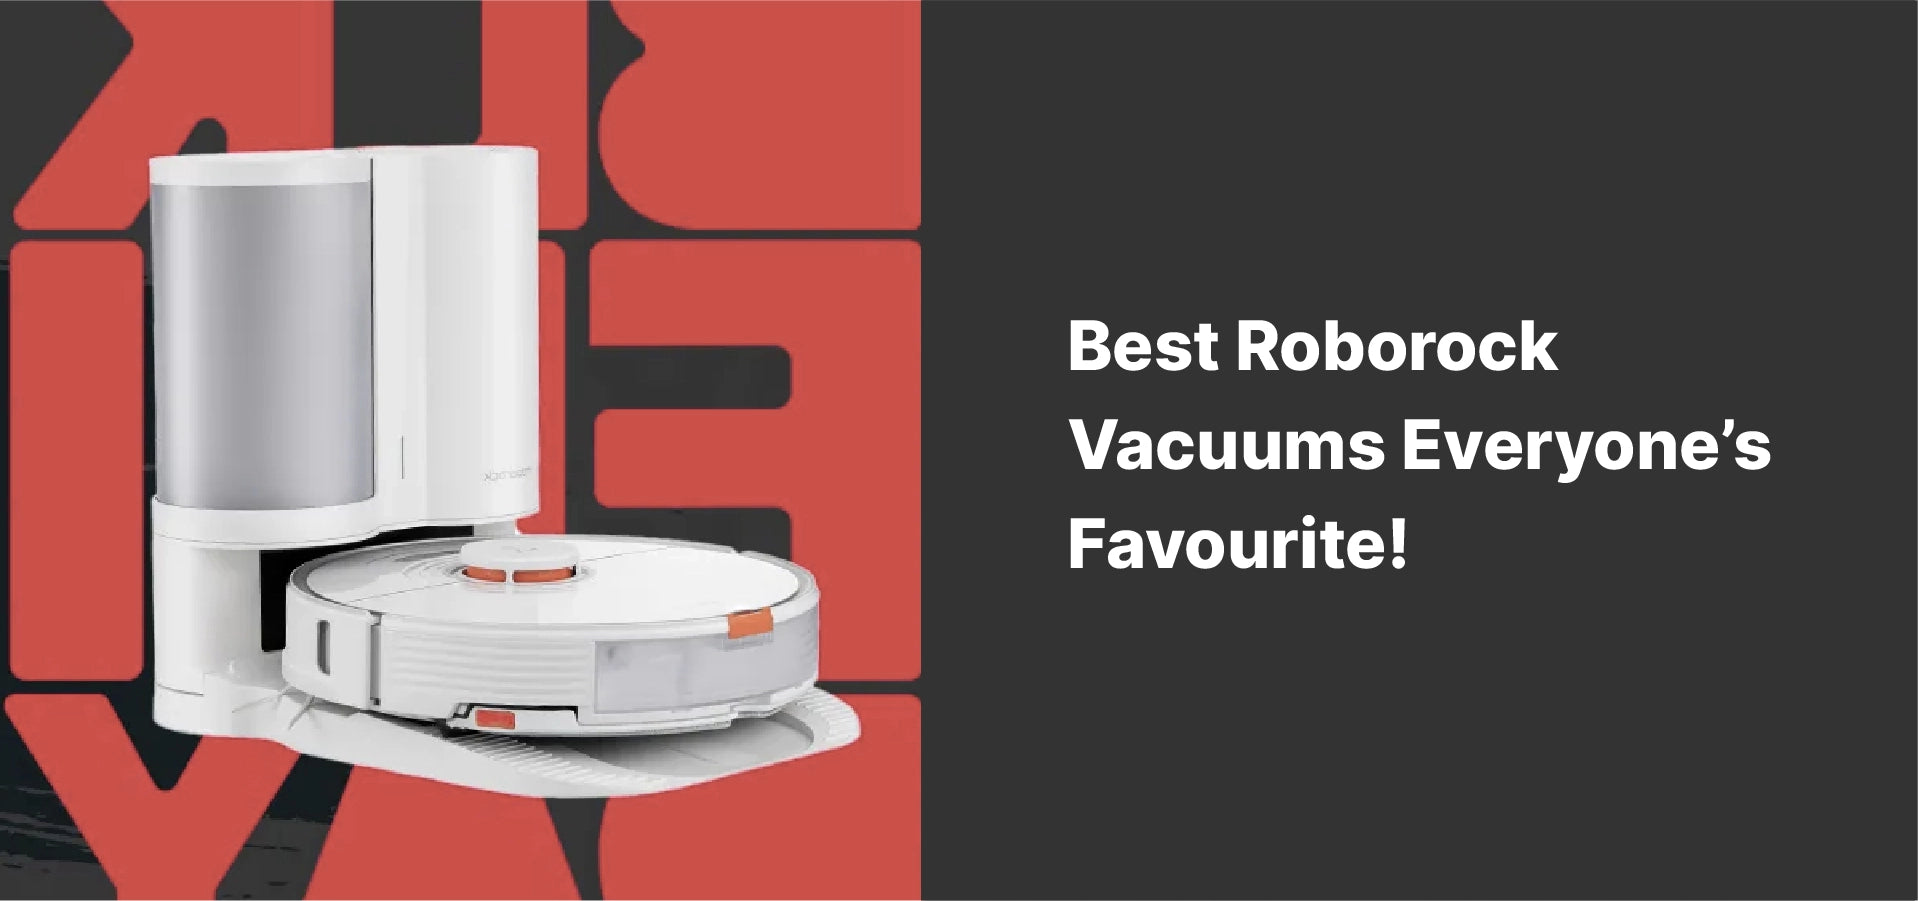 Best Roborock Vacuum cleaner and Mop - Everyone’s Favourite!